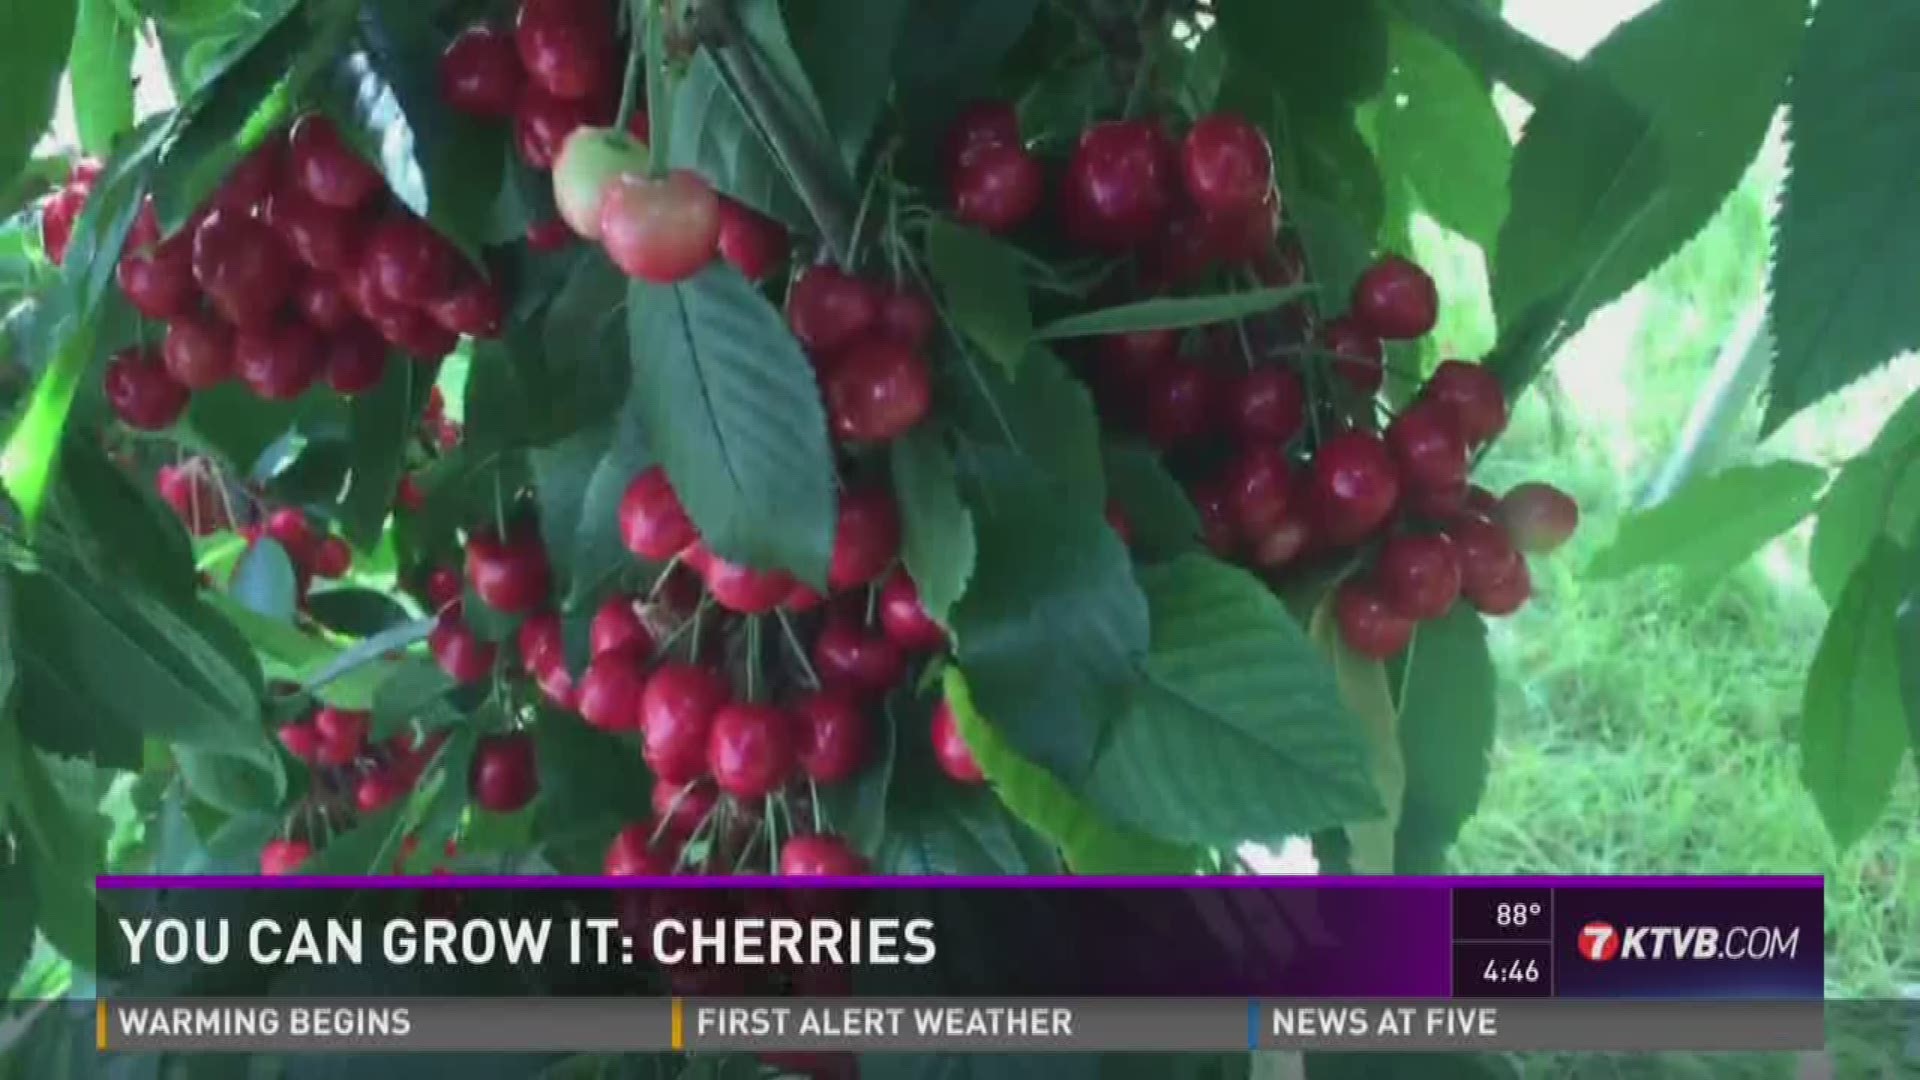 Jim Duthie teams up with Chef Lou Aaron to show us some recipes for cherries.